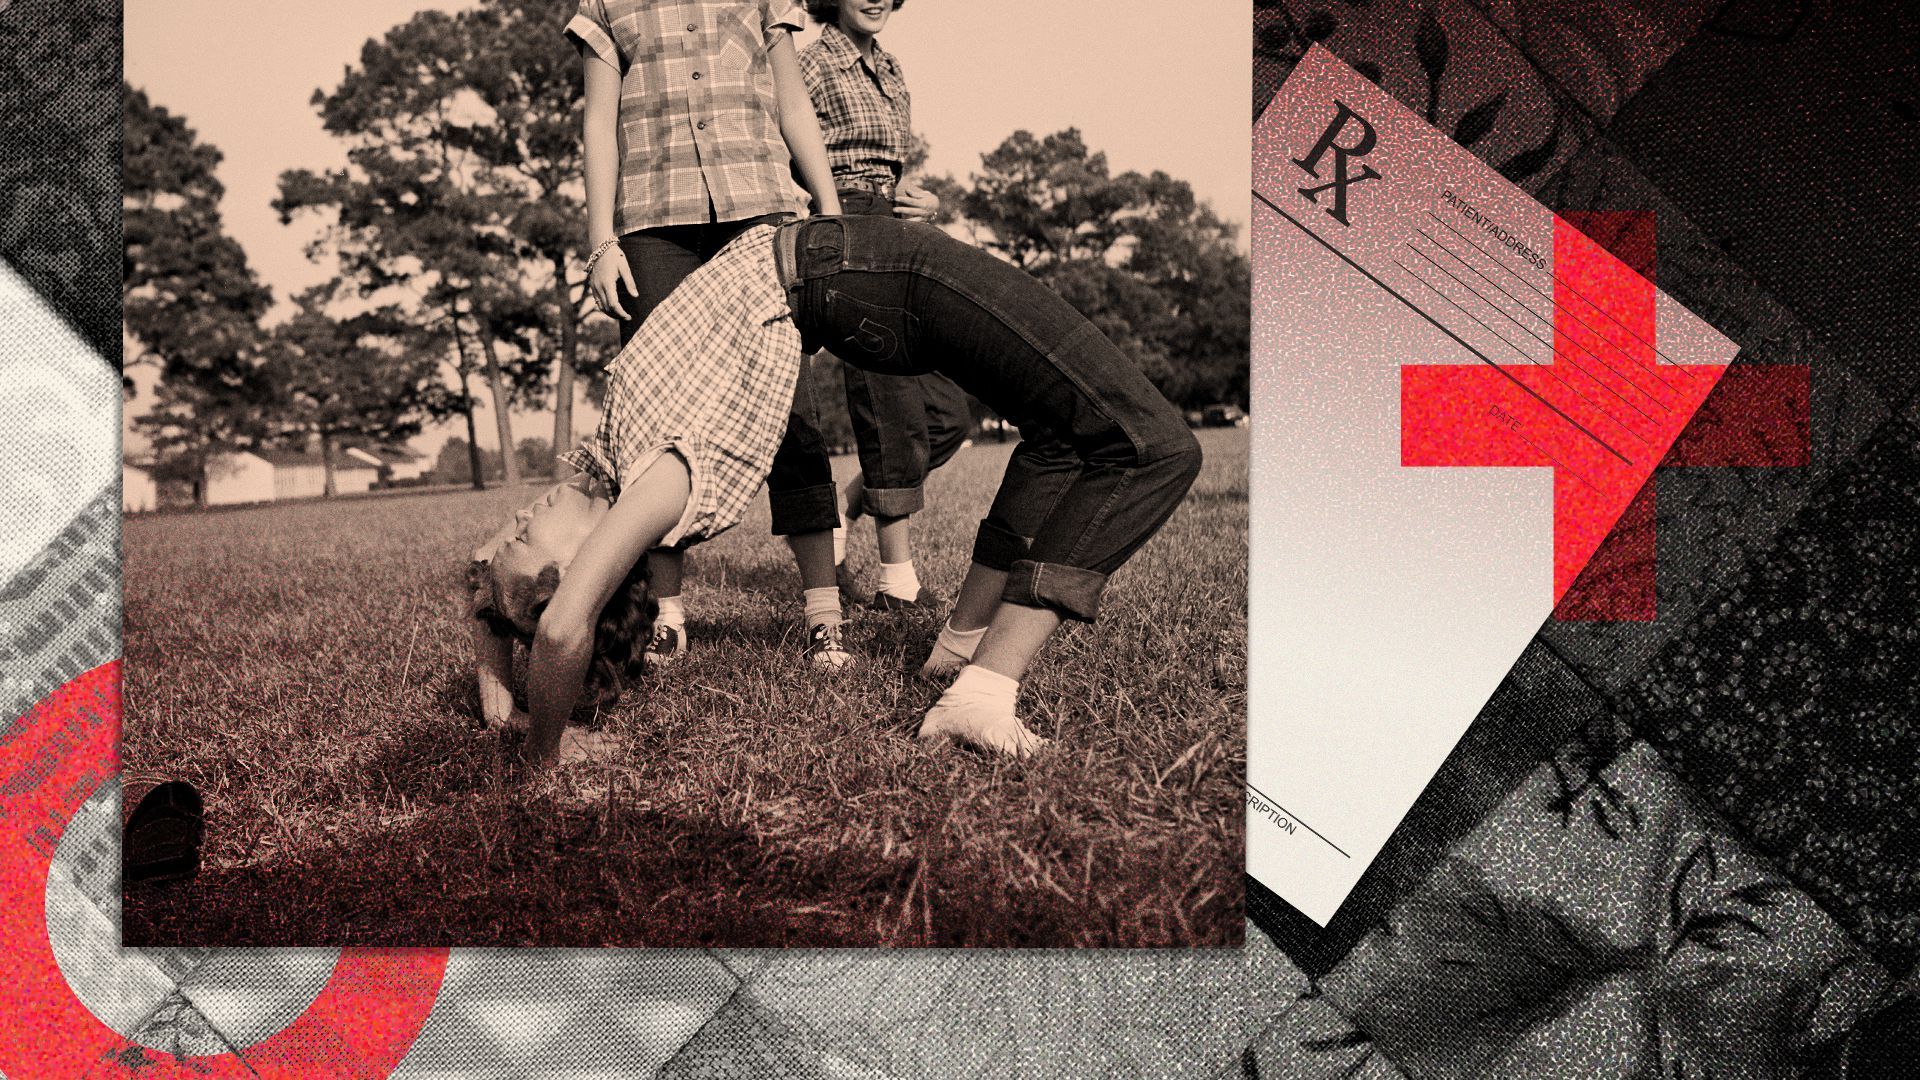 Photo illustration collage of teen girls in the 1950s playing outside, one doing a back bend, in front of an image of a quilt, a prescription pad, and medical red crosses and other graphic shapes.